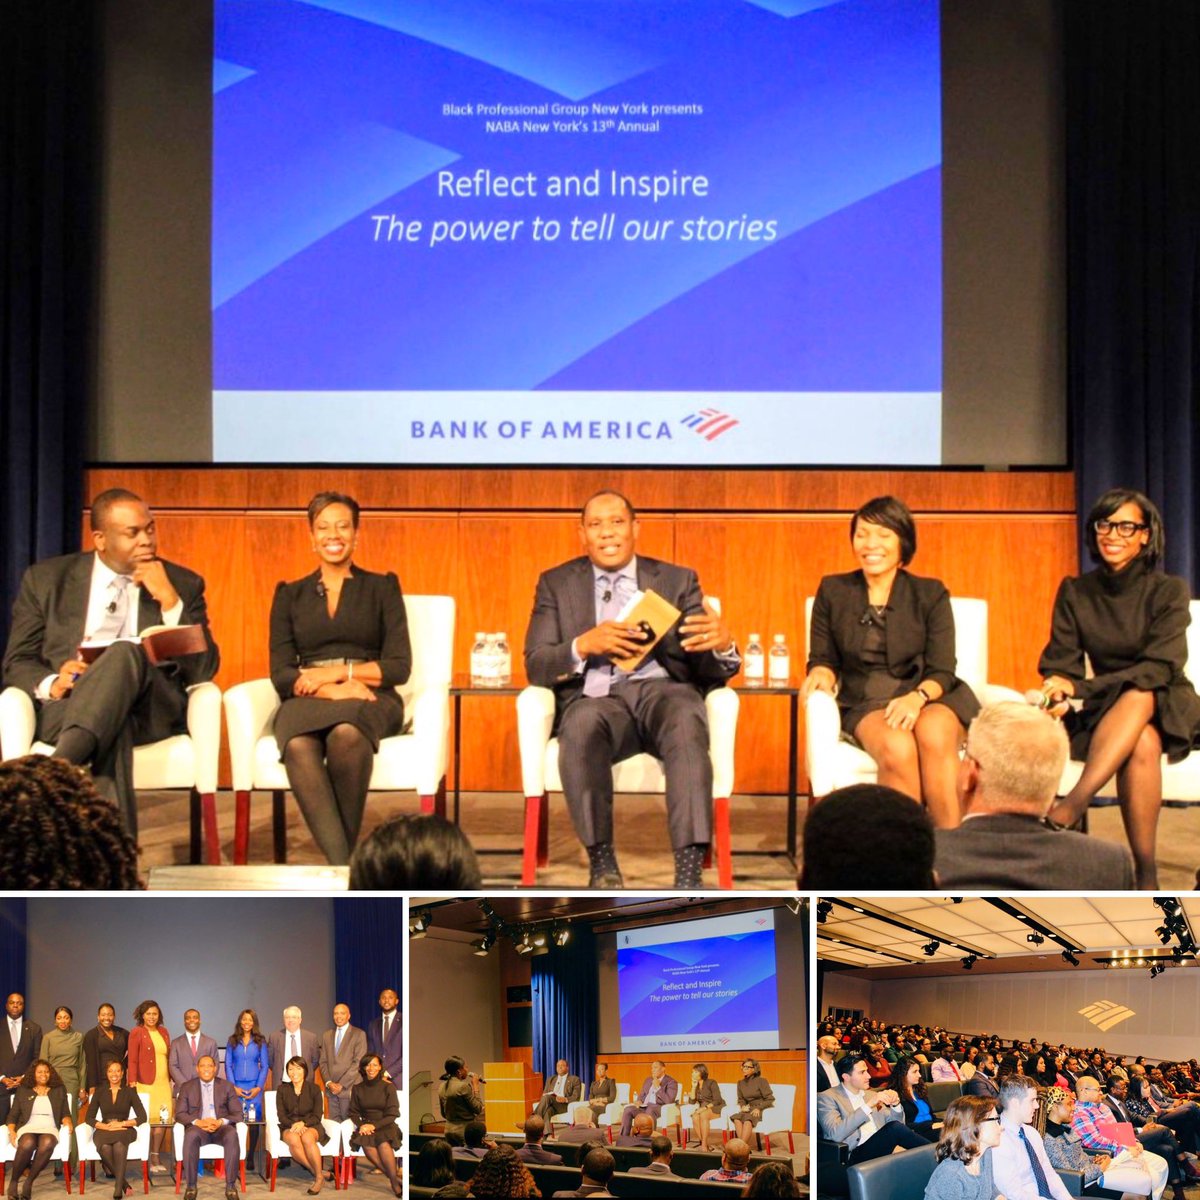 Thanks to @BankofAmerica and @NABANEWYORK for hosting me on the panel for the 13th Annual “Reflect and Inspire” discussion! A wonderful way to close out Black History Month! #bankofamerica #nabany #ey #reflectandinspire #blackhistorymonth